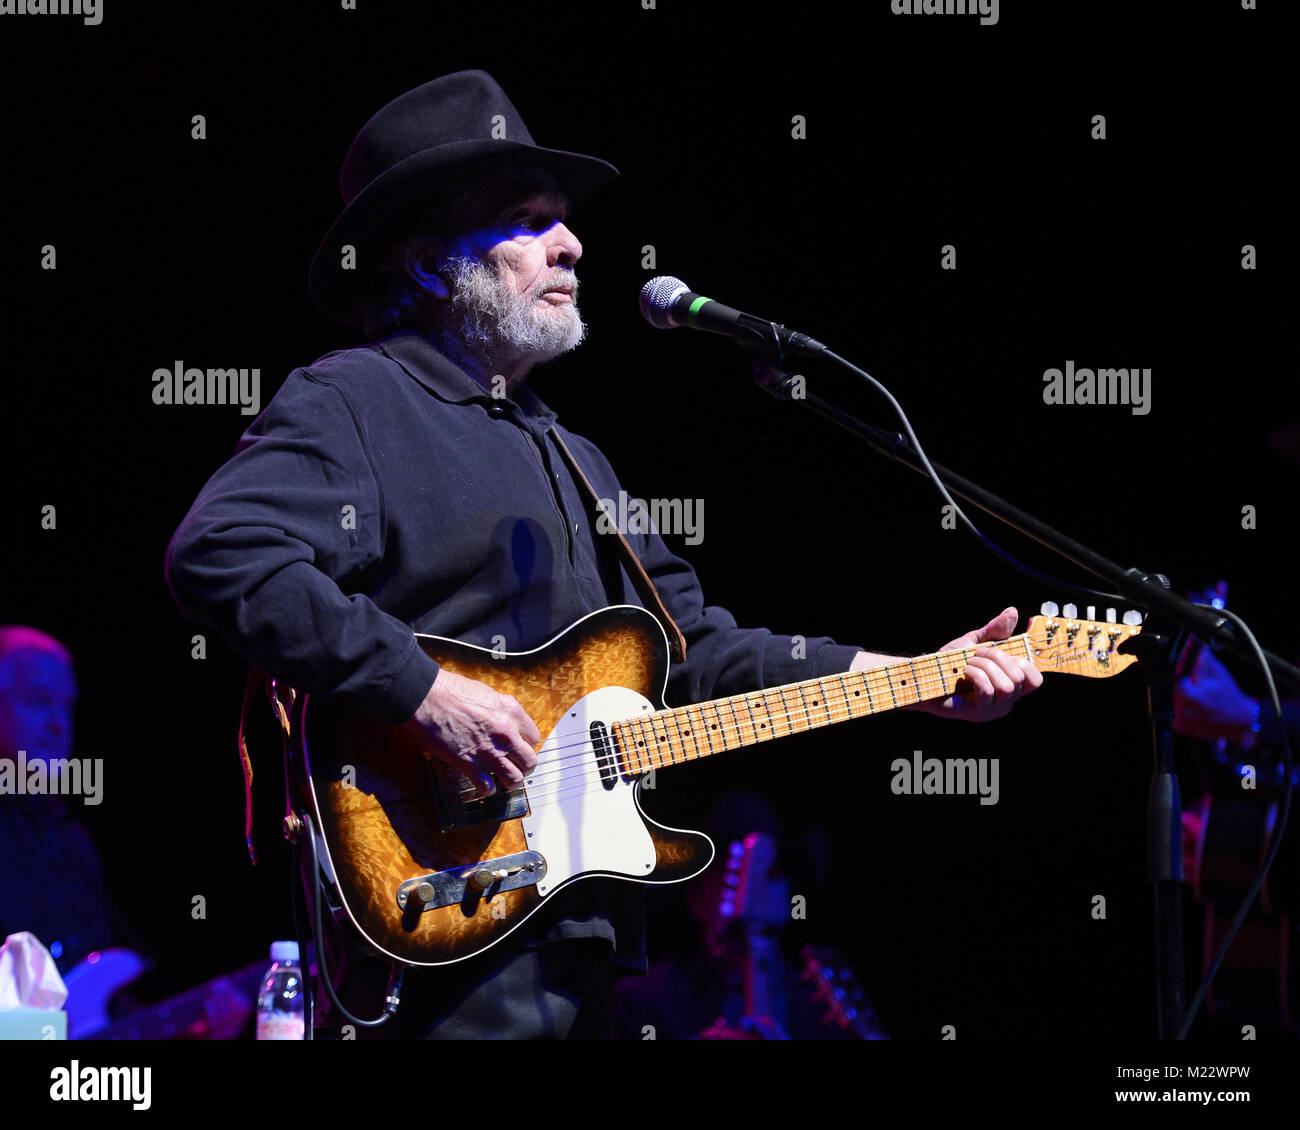 NORTHRIDGE, CA - FEBRUARY 27: Merle Haggard performs at Valley Performing Arts Center.  on February 27, 2013 in  in Northridge, California  People:  Merle Haggard Stock Photo